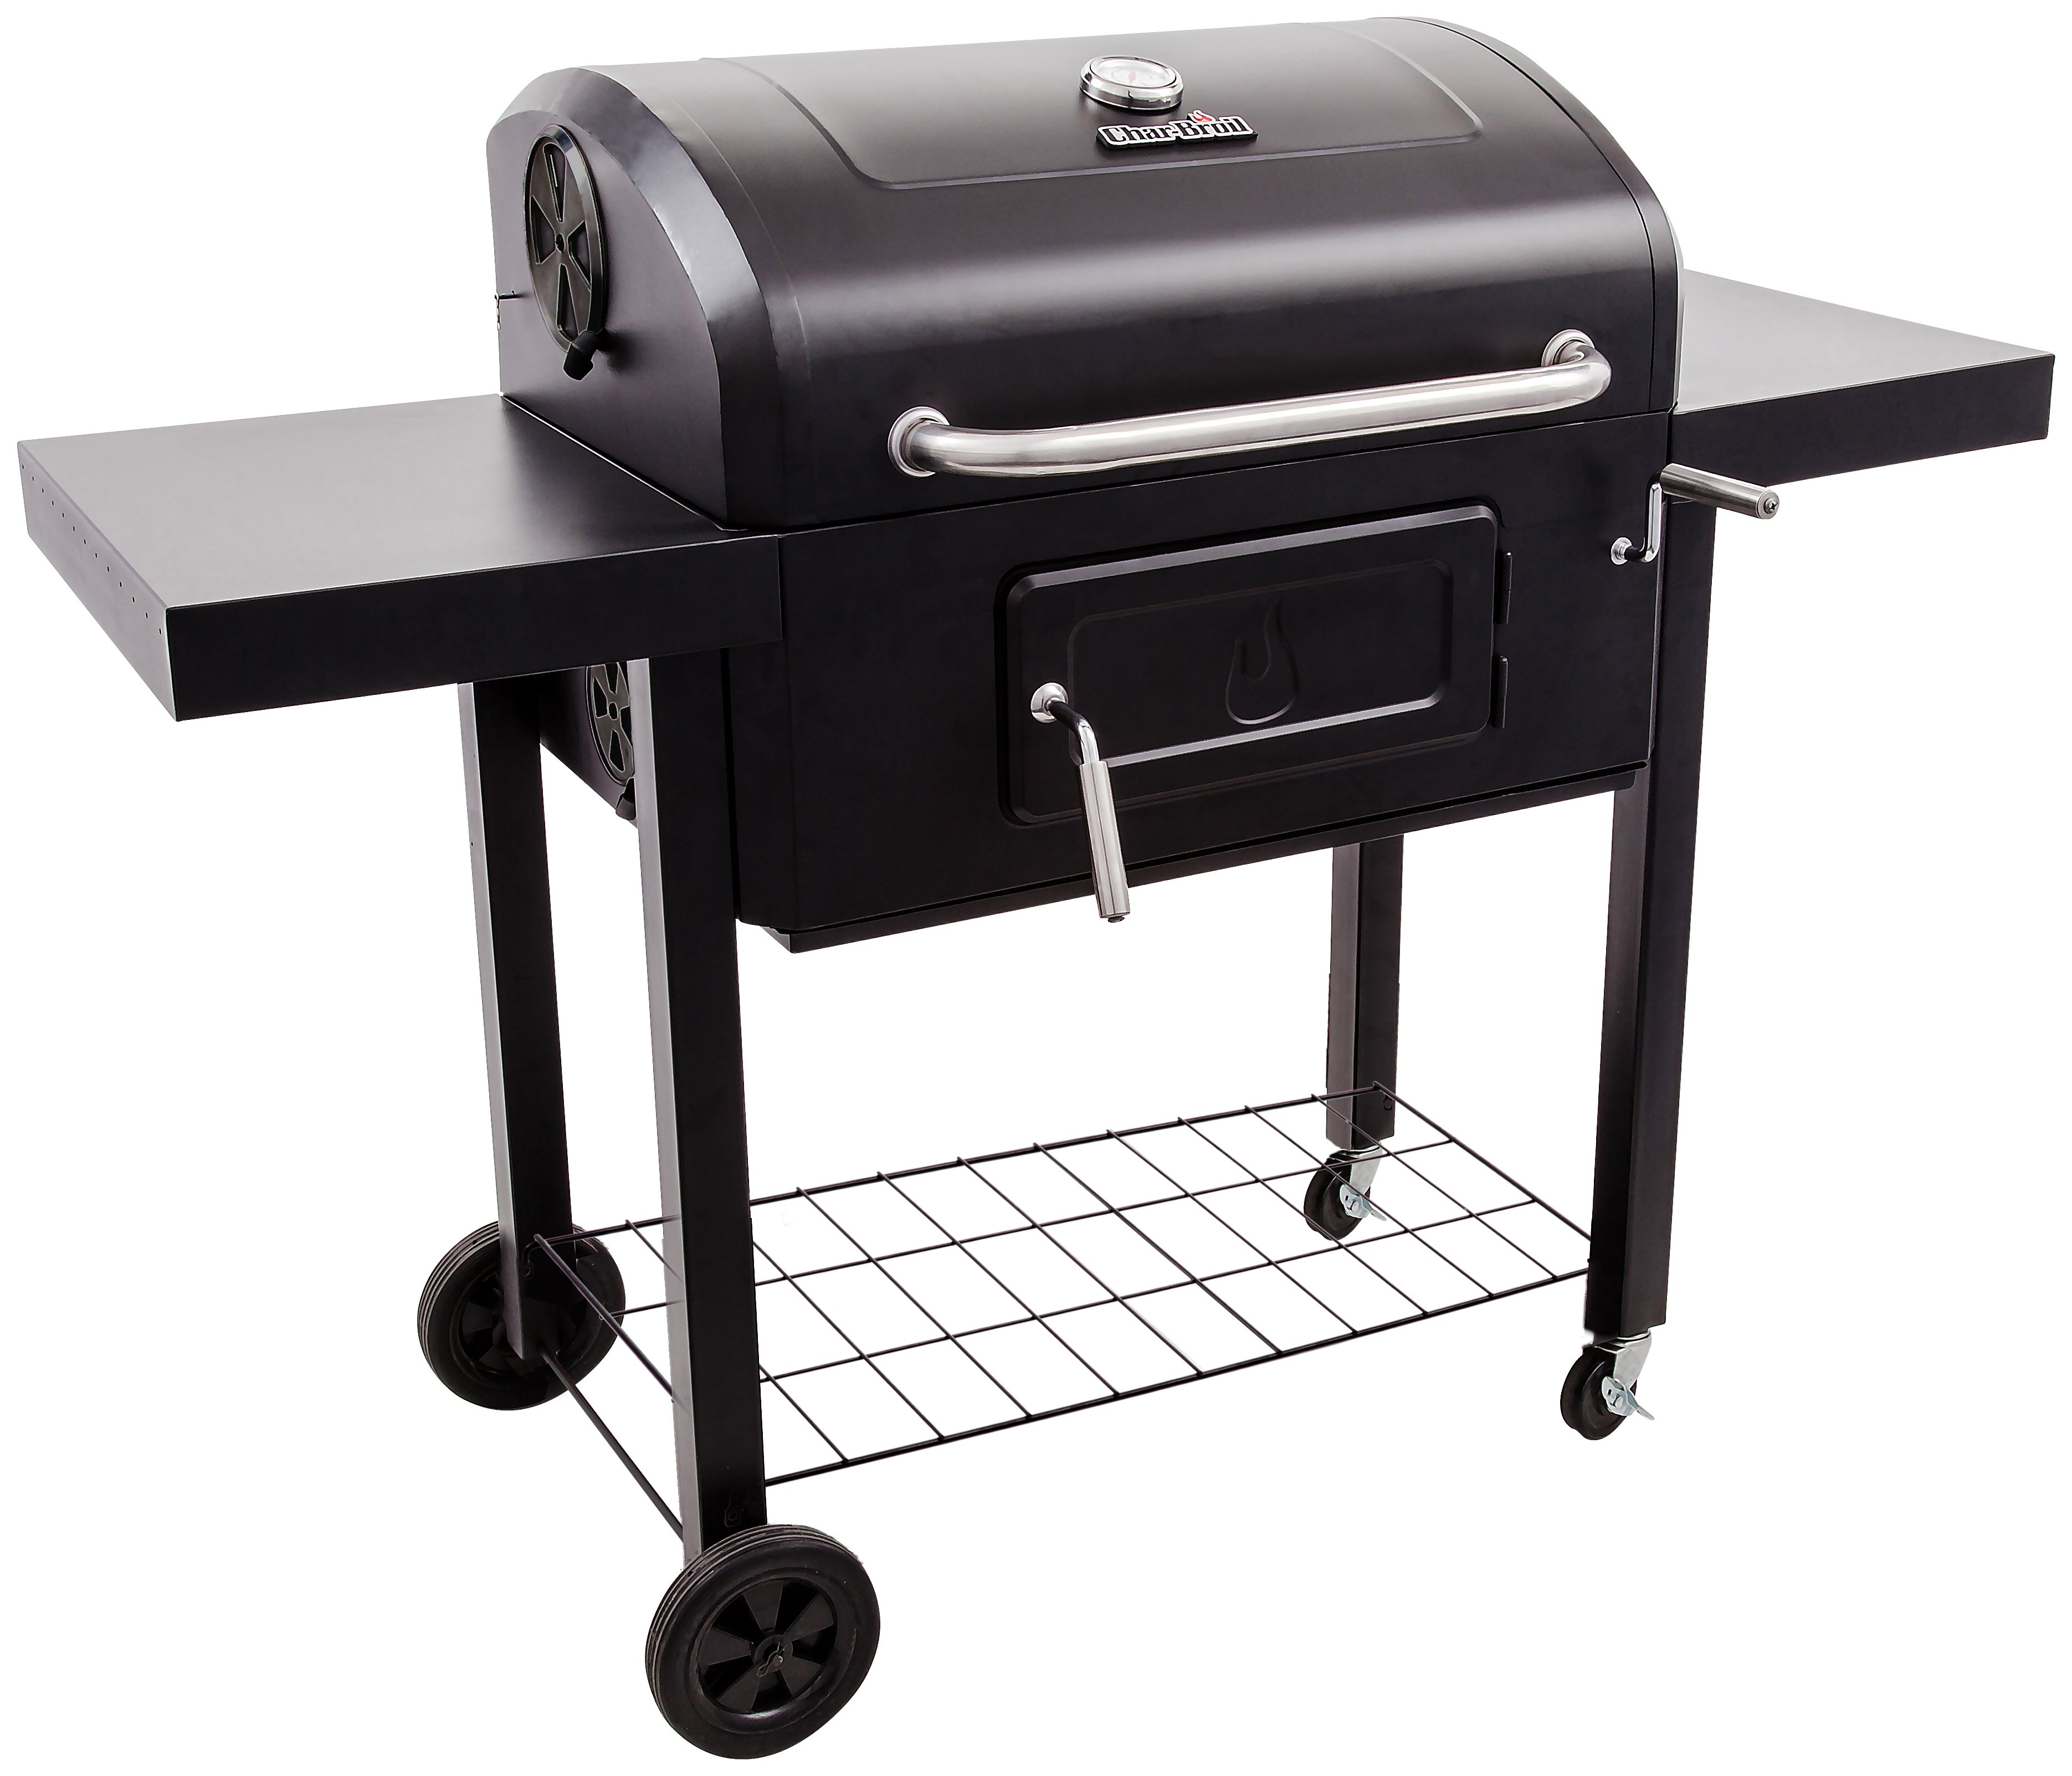 Char-Broil 3500 - Large Charcoal BBQ Grill